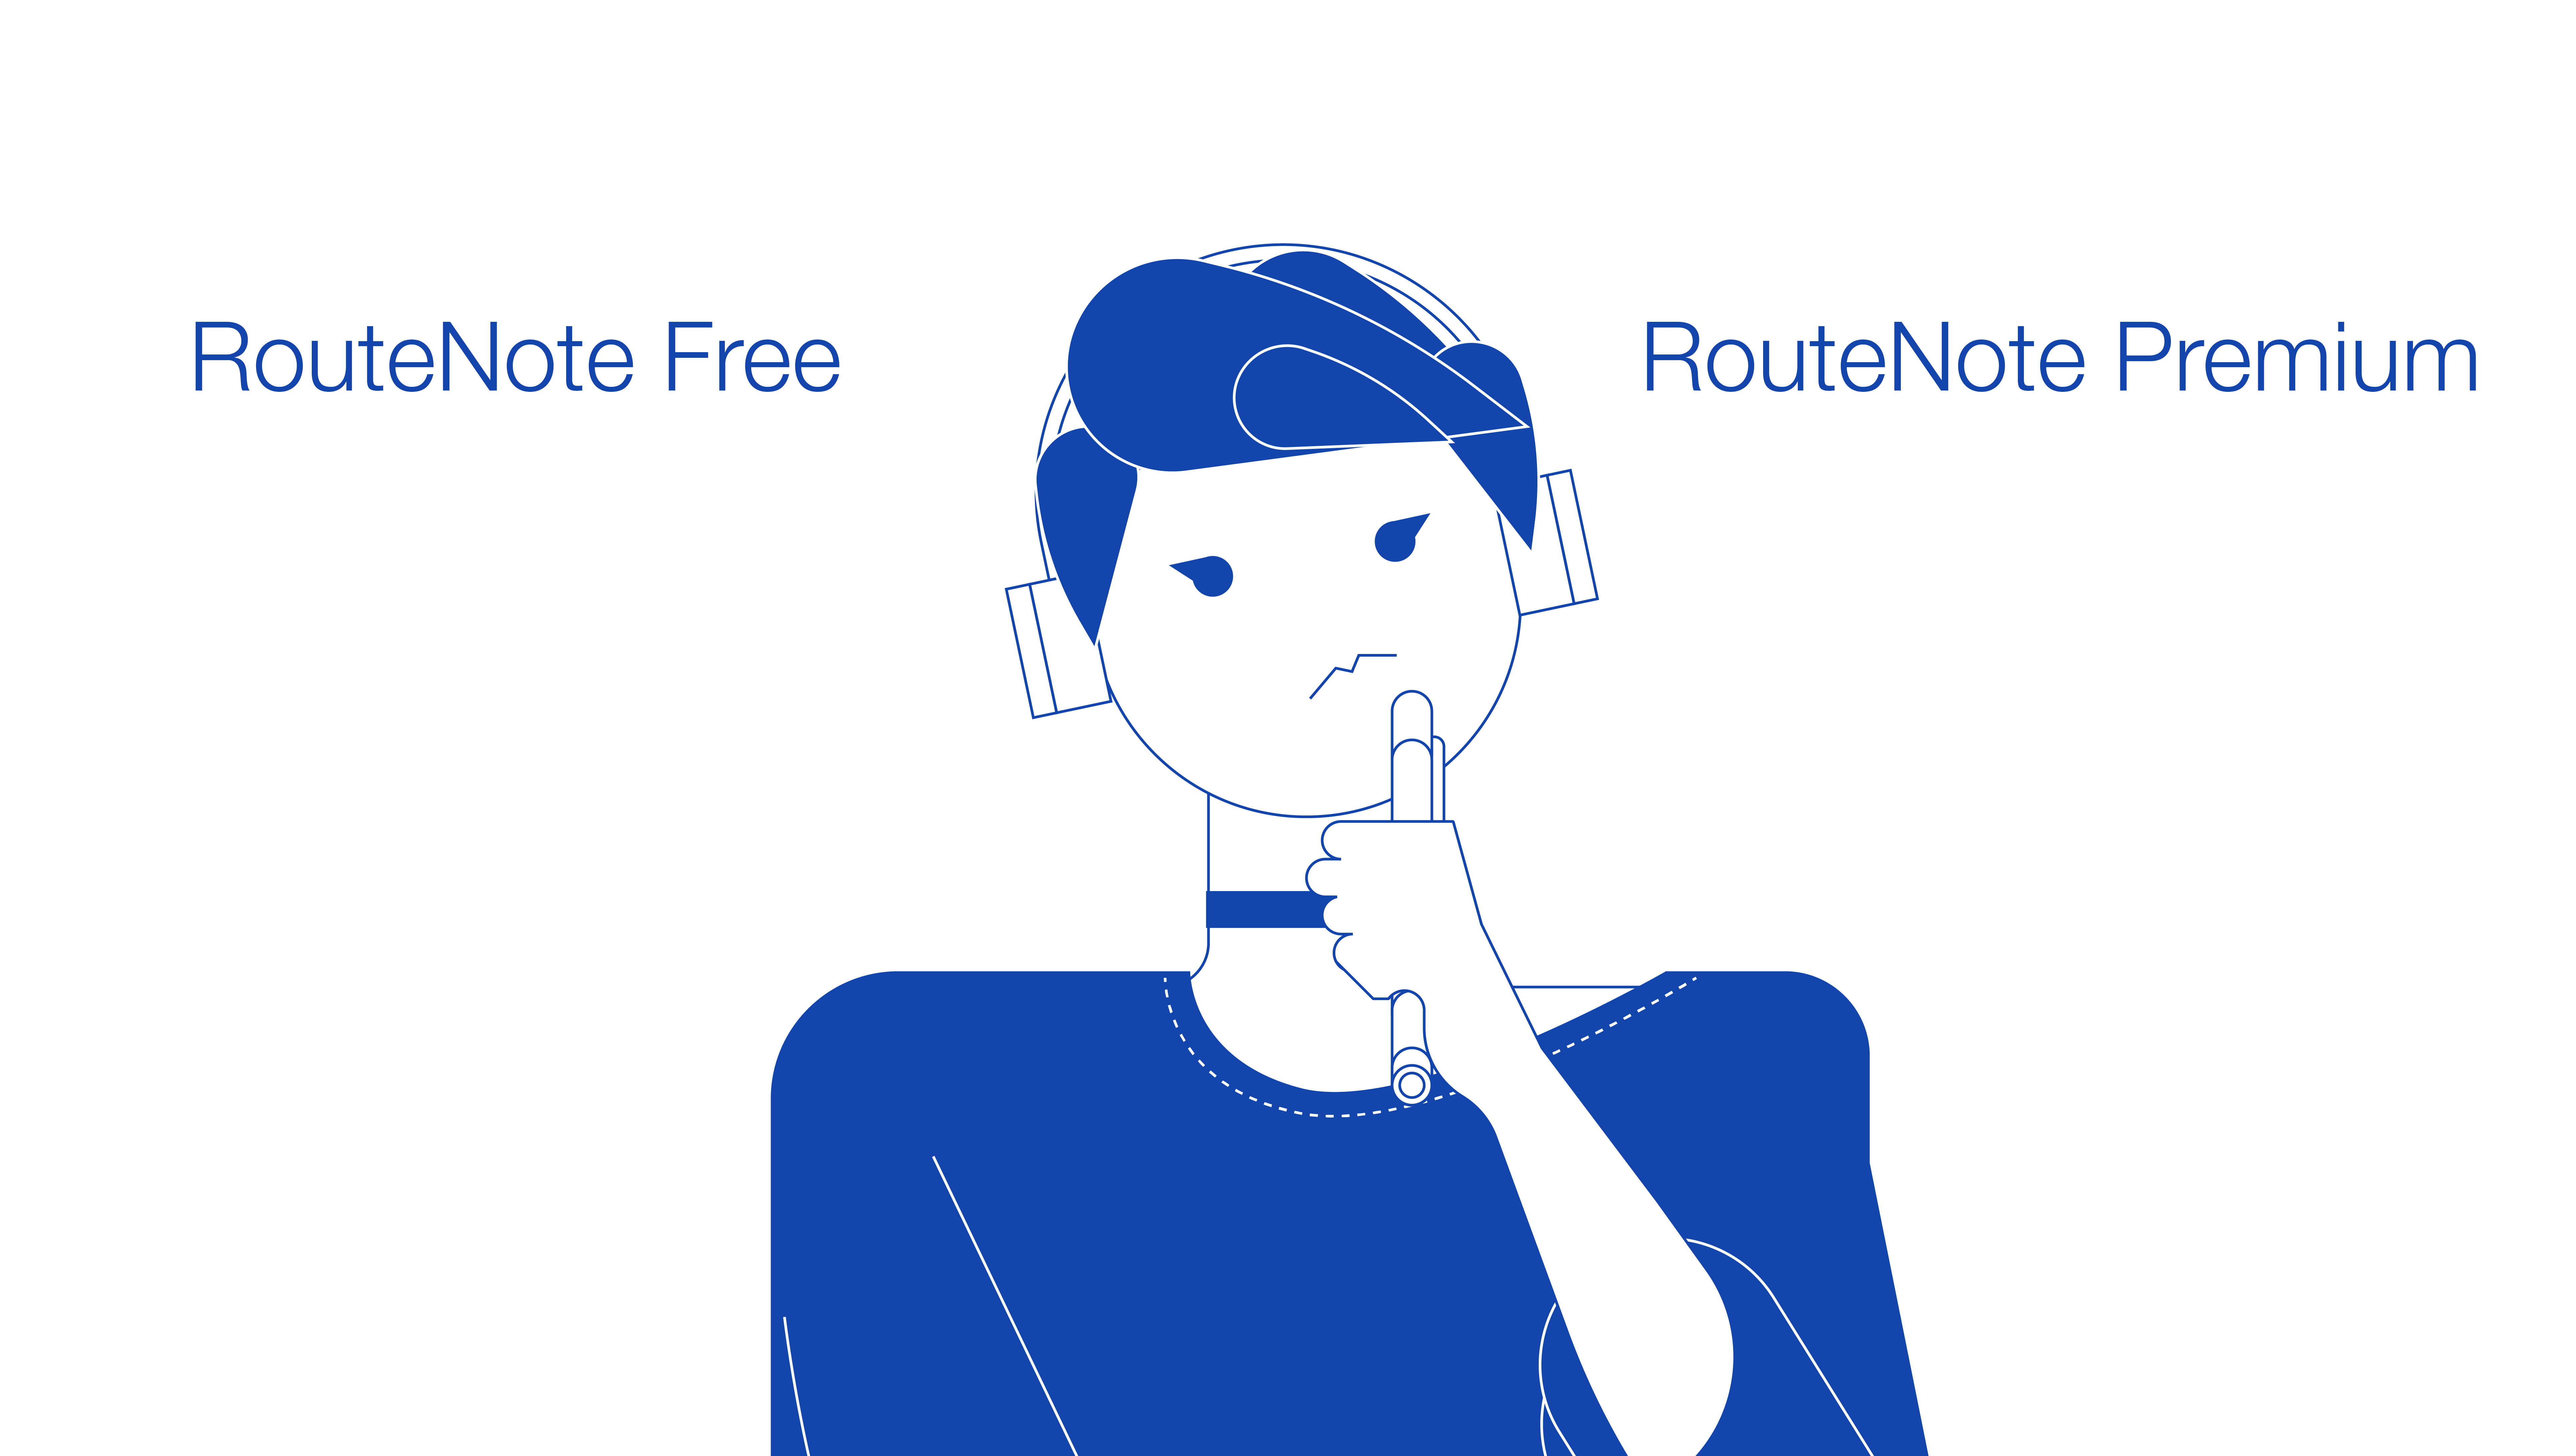 Is RouteNote really free?